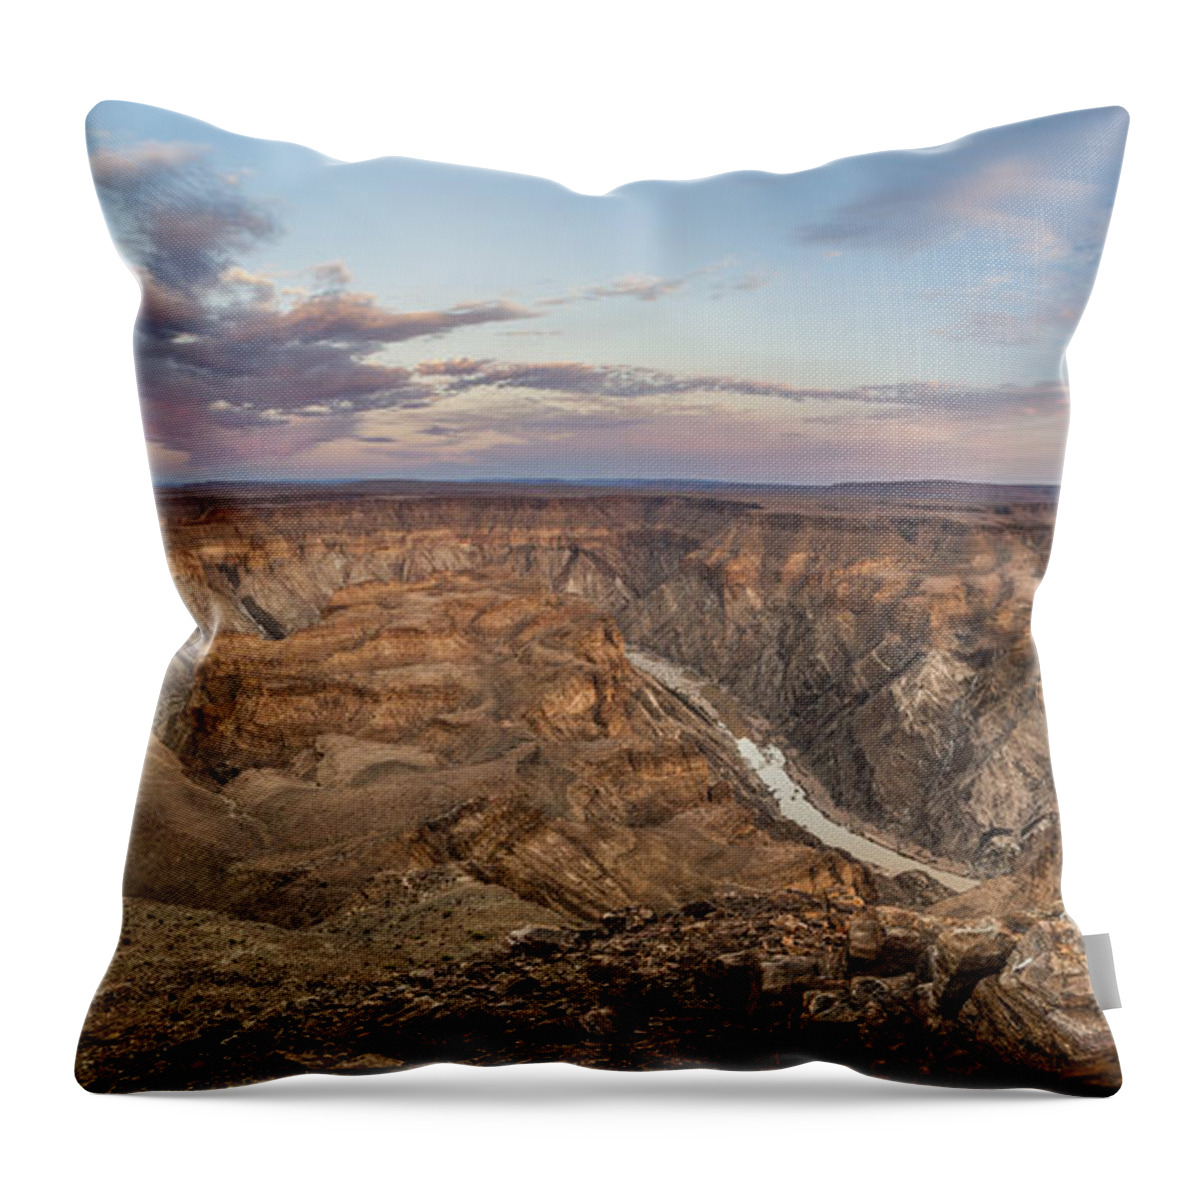 Vincent Grafhorst Throw Pillow featuring the photograph Winding Fish River Canyon And Desert by Vincent Grafhorst